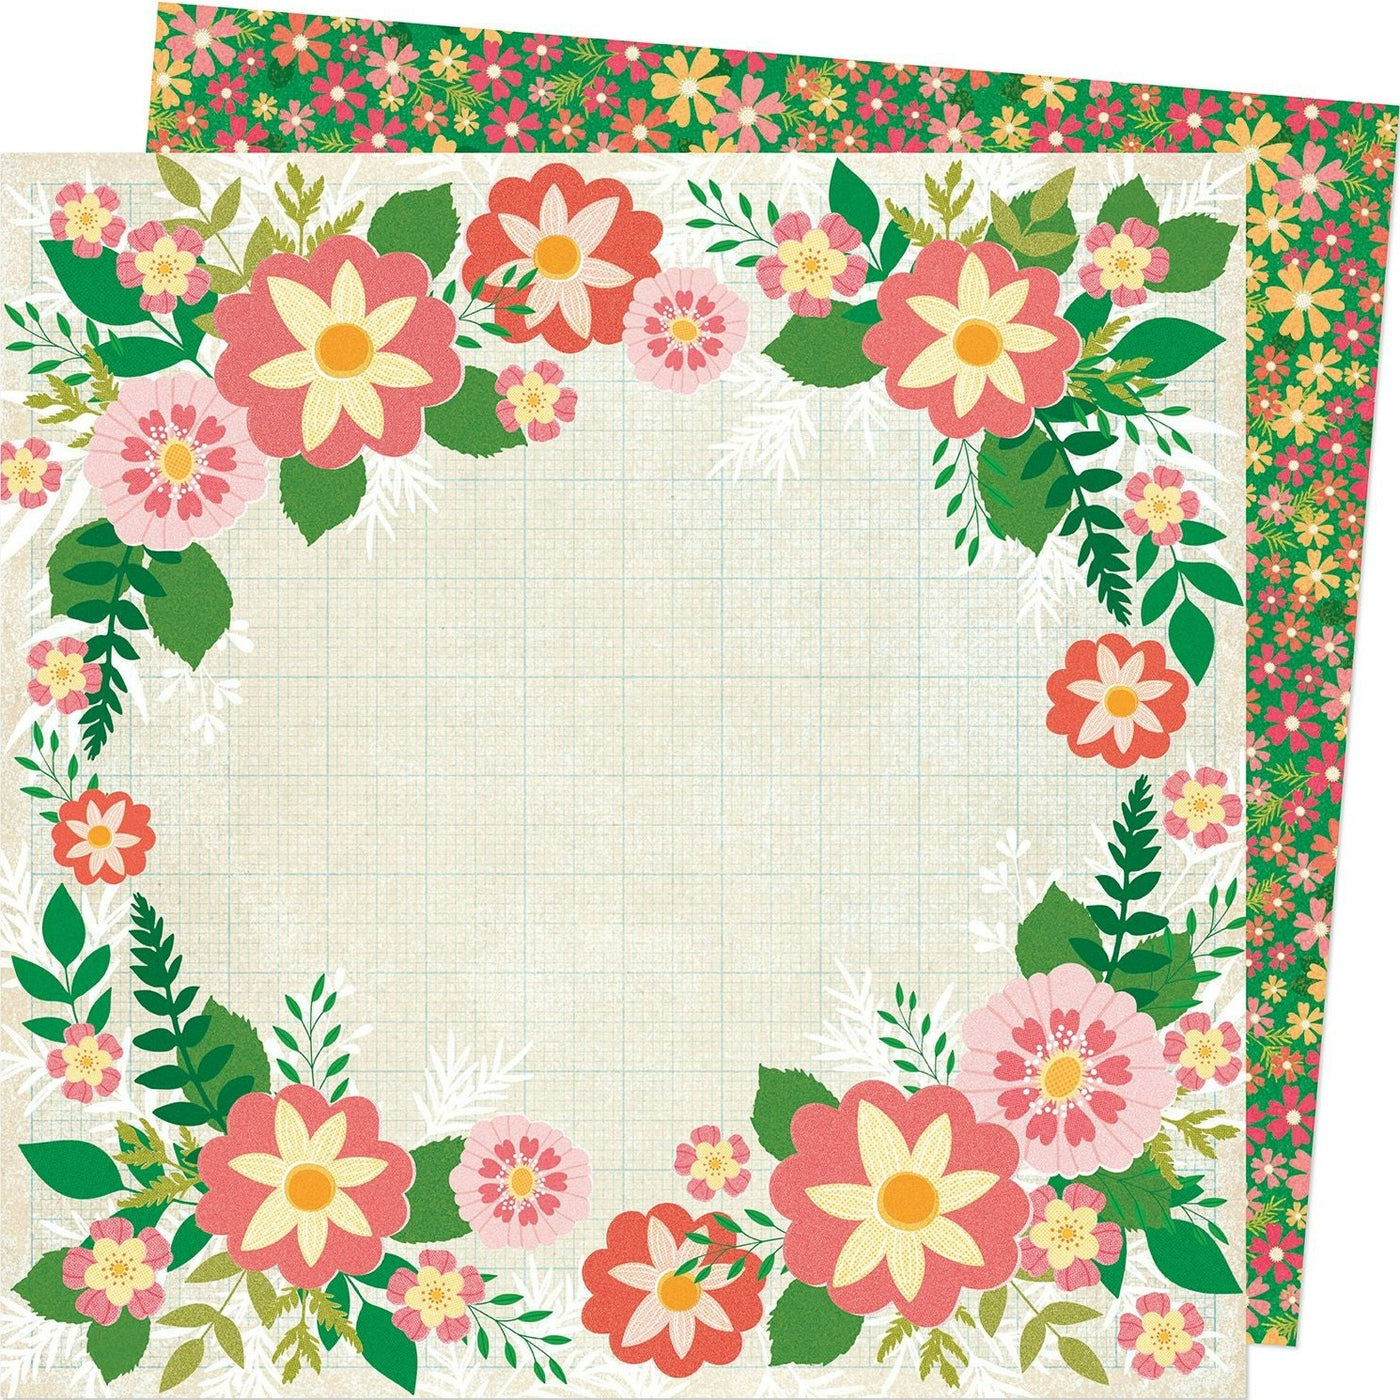 (Side A - beautiful floral frame on a cream grid background, Side B - cute little floral pattern on a green background)